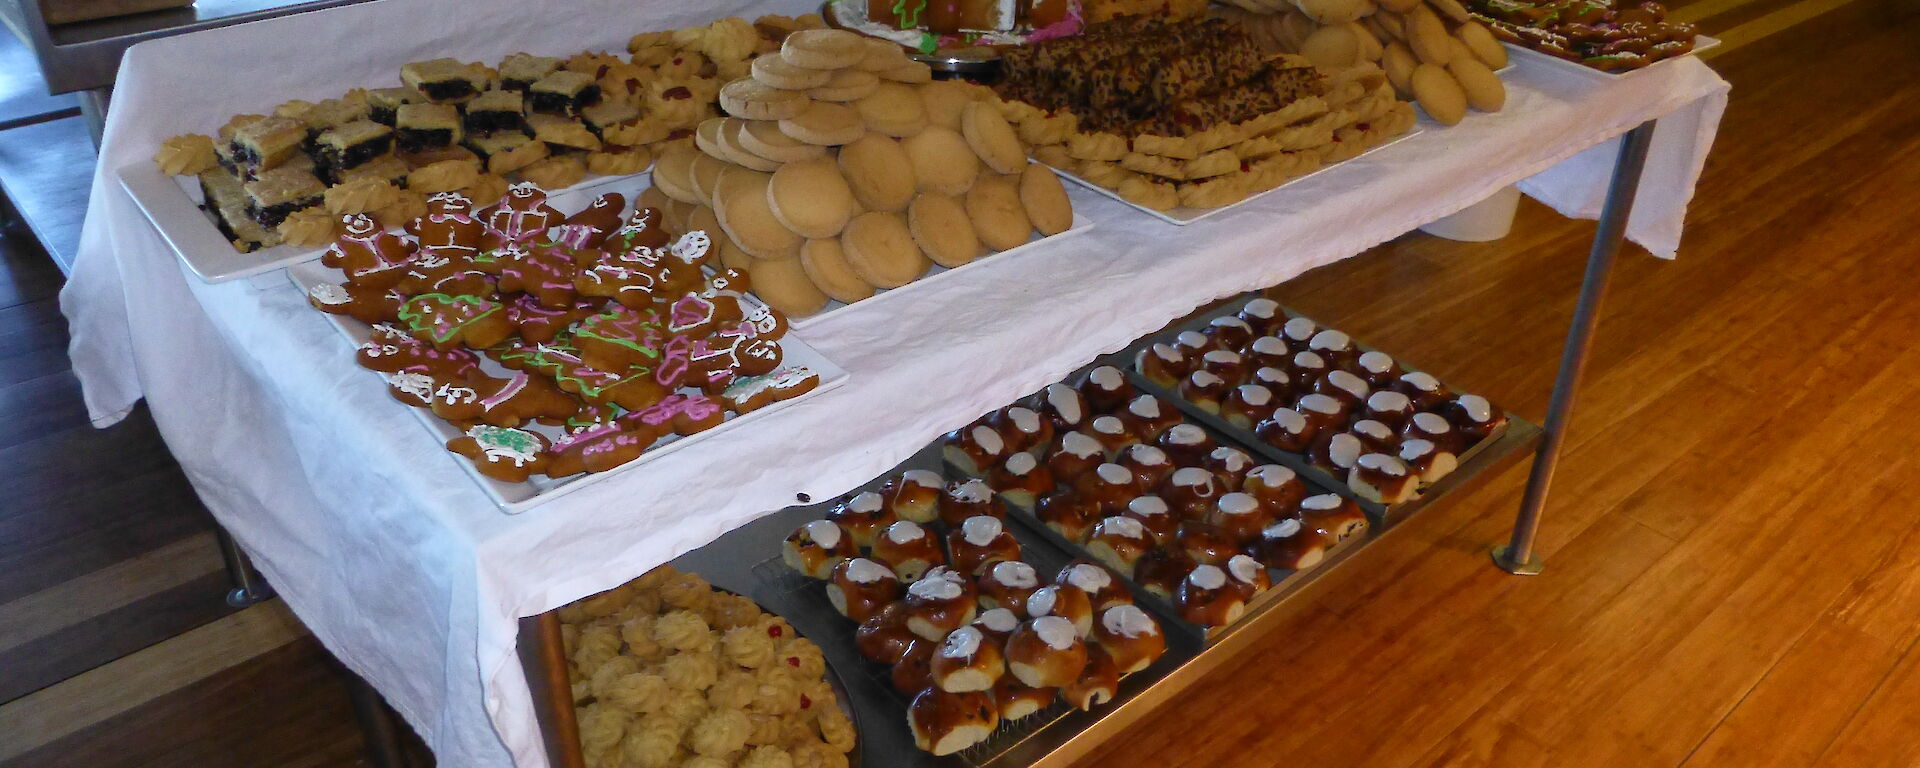 A selection of cakes and biscuits for Christmas morning